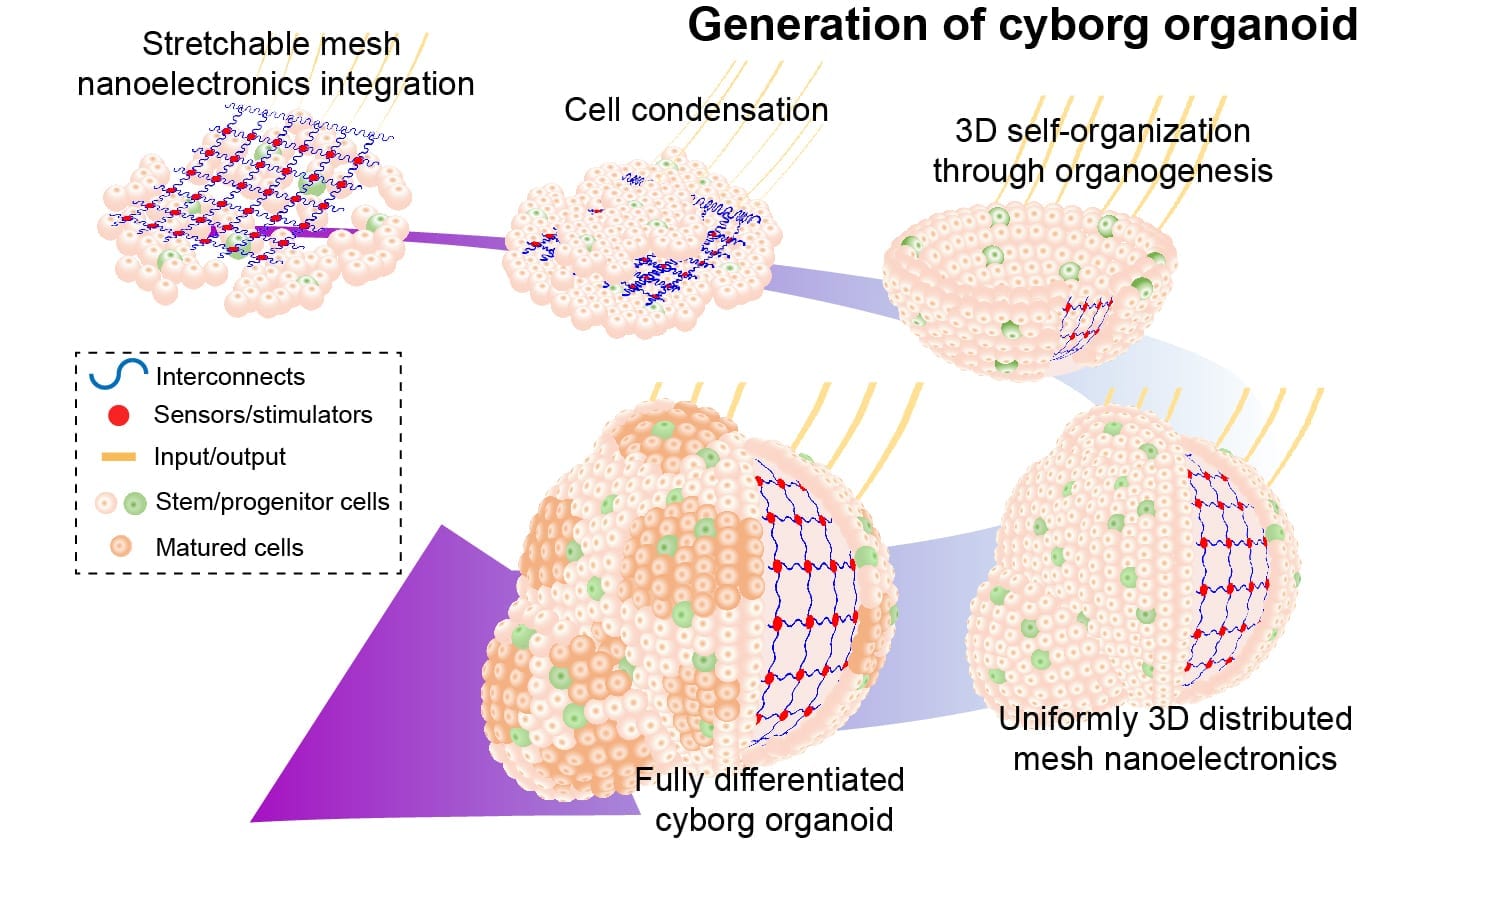 Cyborg organoids: Stretchable, integrated mesh nanoelectronics grow with developing cells